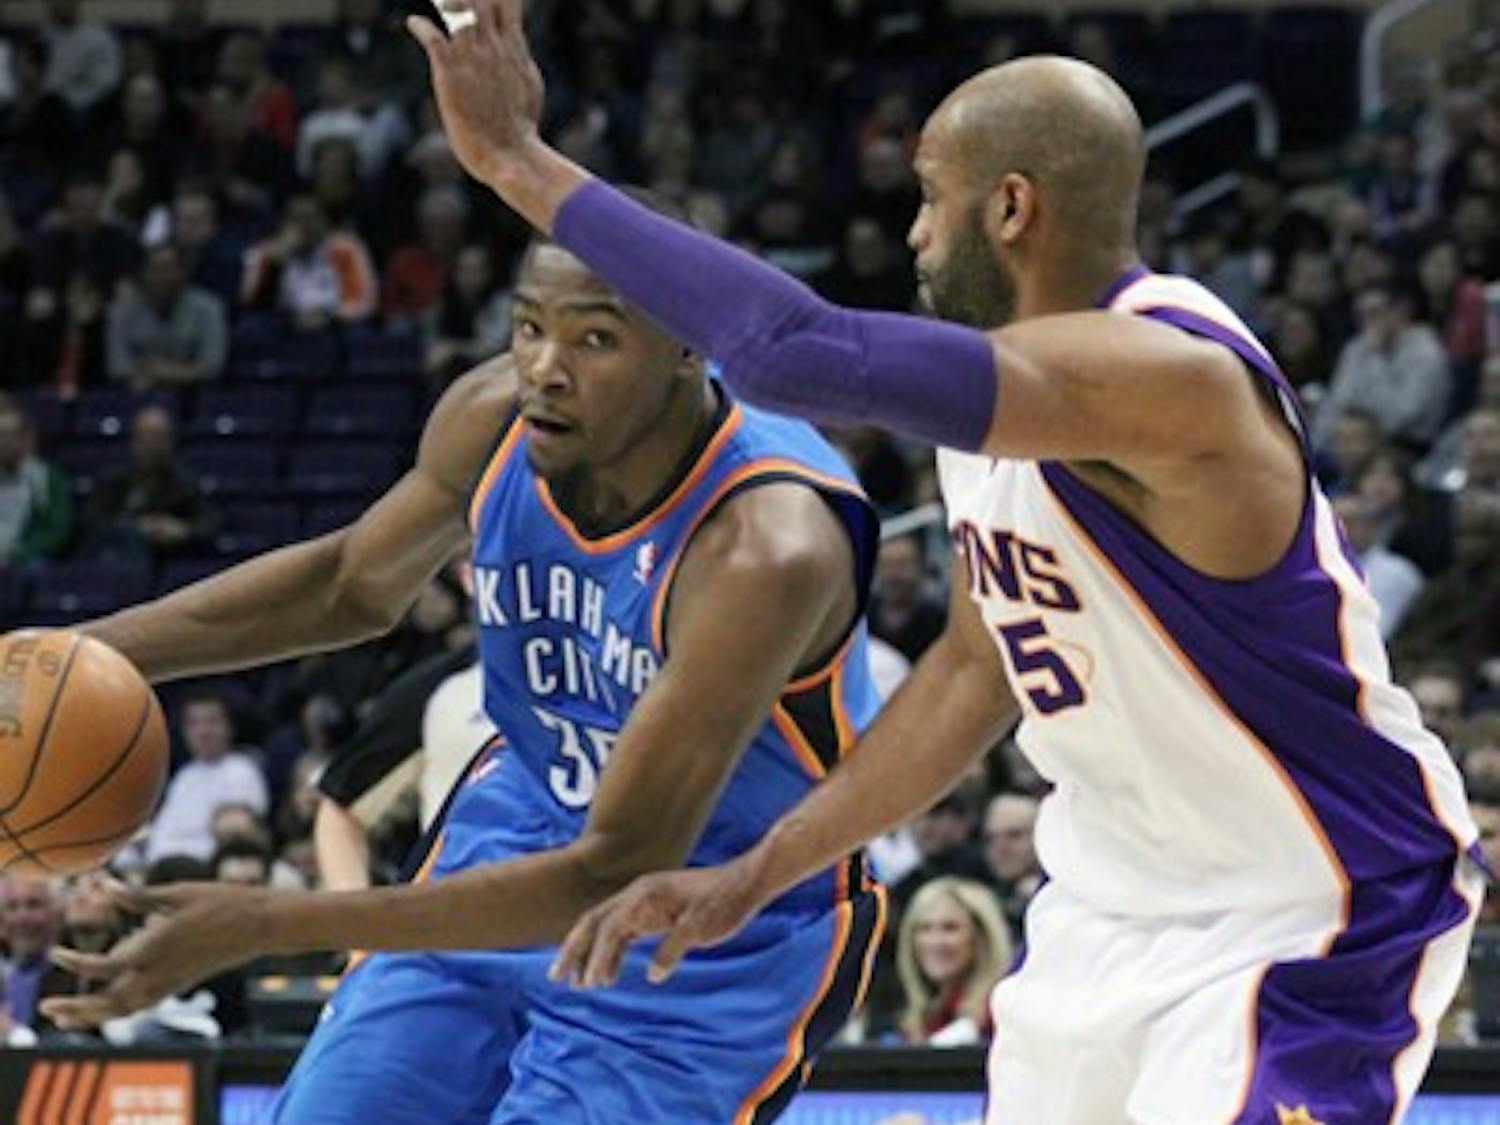 Oklahoma City small forward Kevin Durant drives inside against Suns’ guard Vince Carter during a game last season. Durant and the rest of the NBA’s stars are all back for the shortened 2011-12 season. (Photo by Beth Easterbrook)